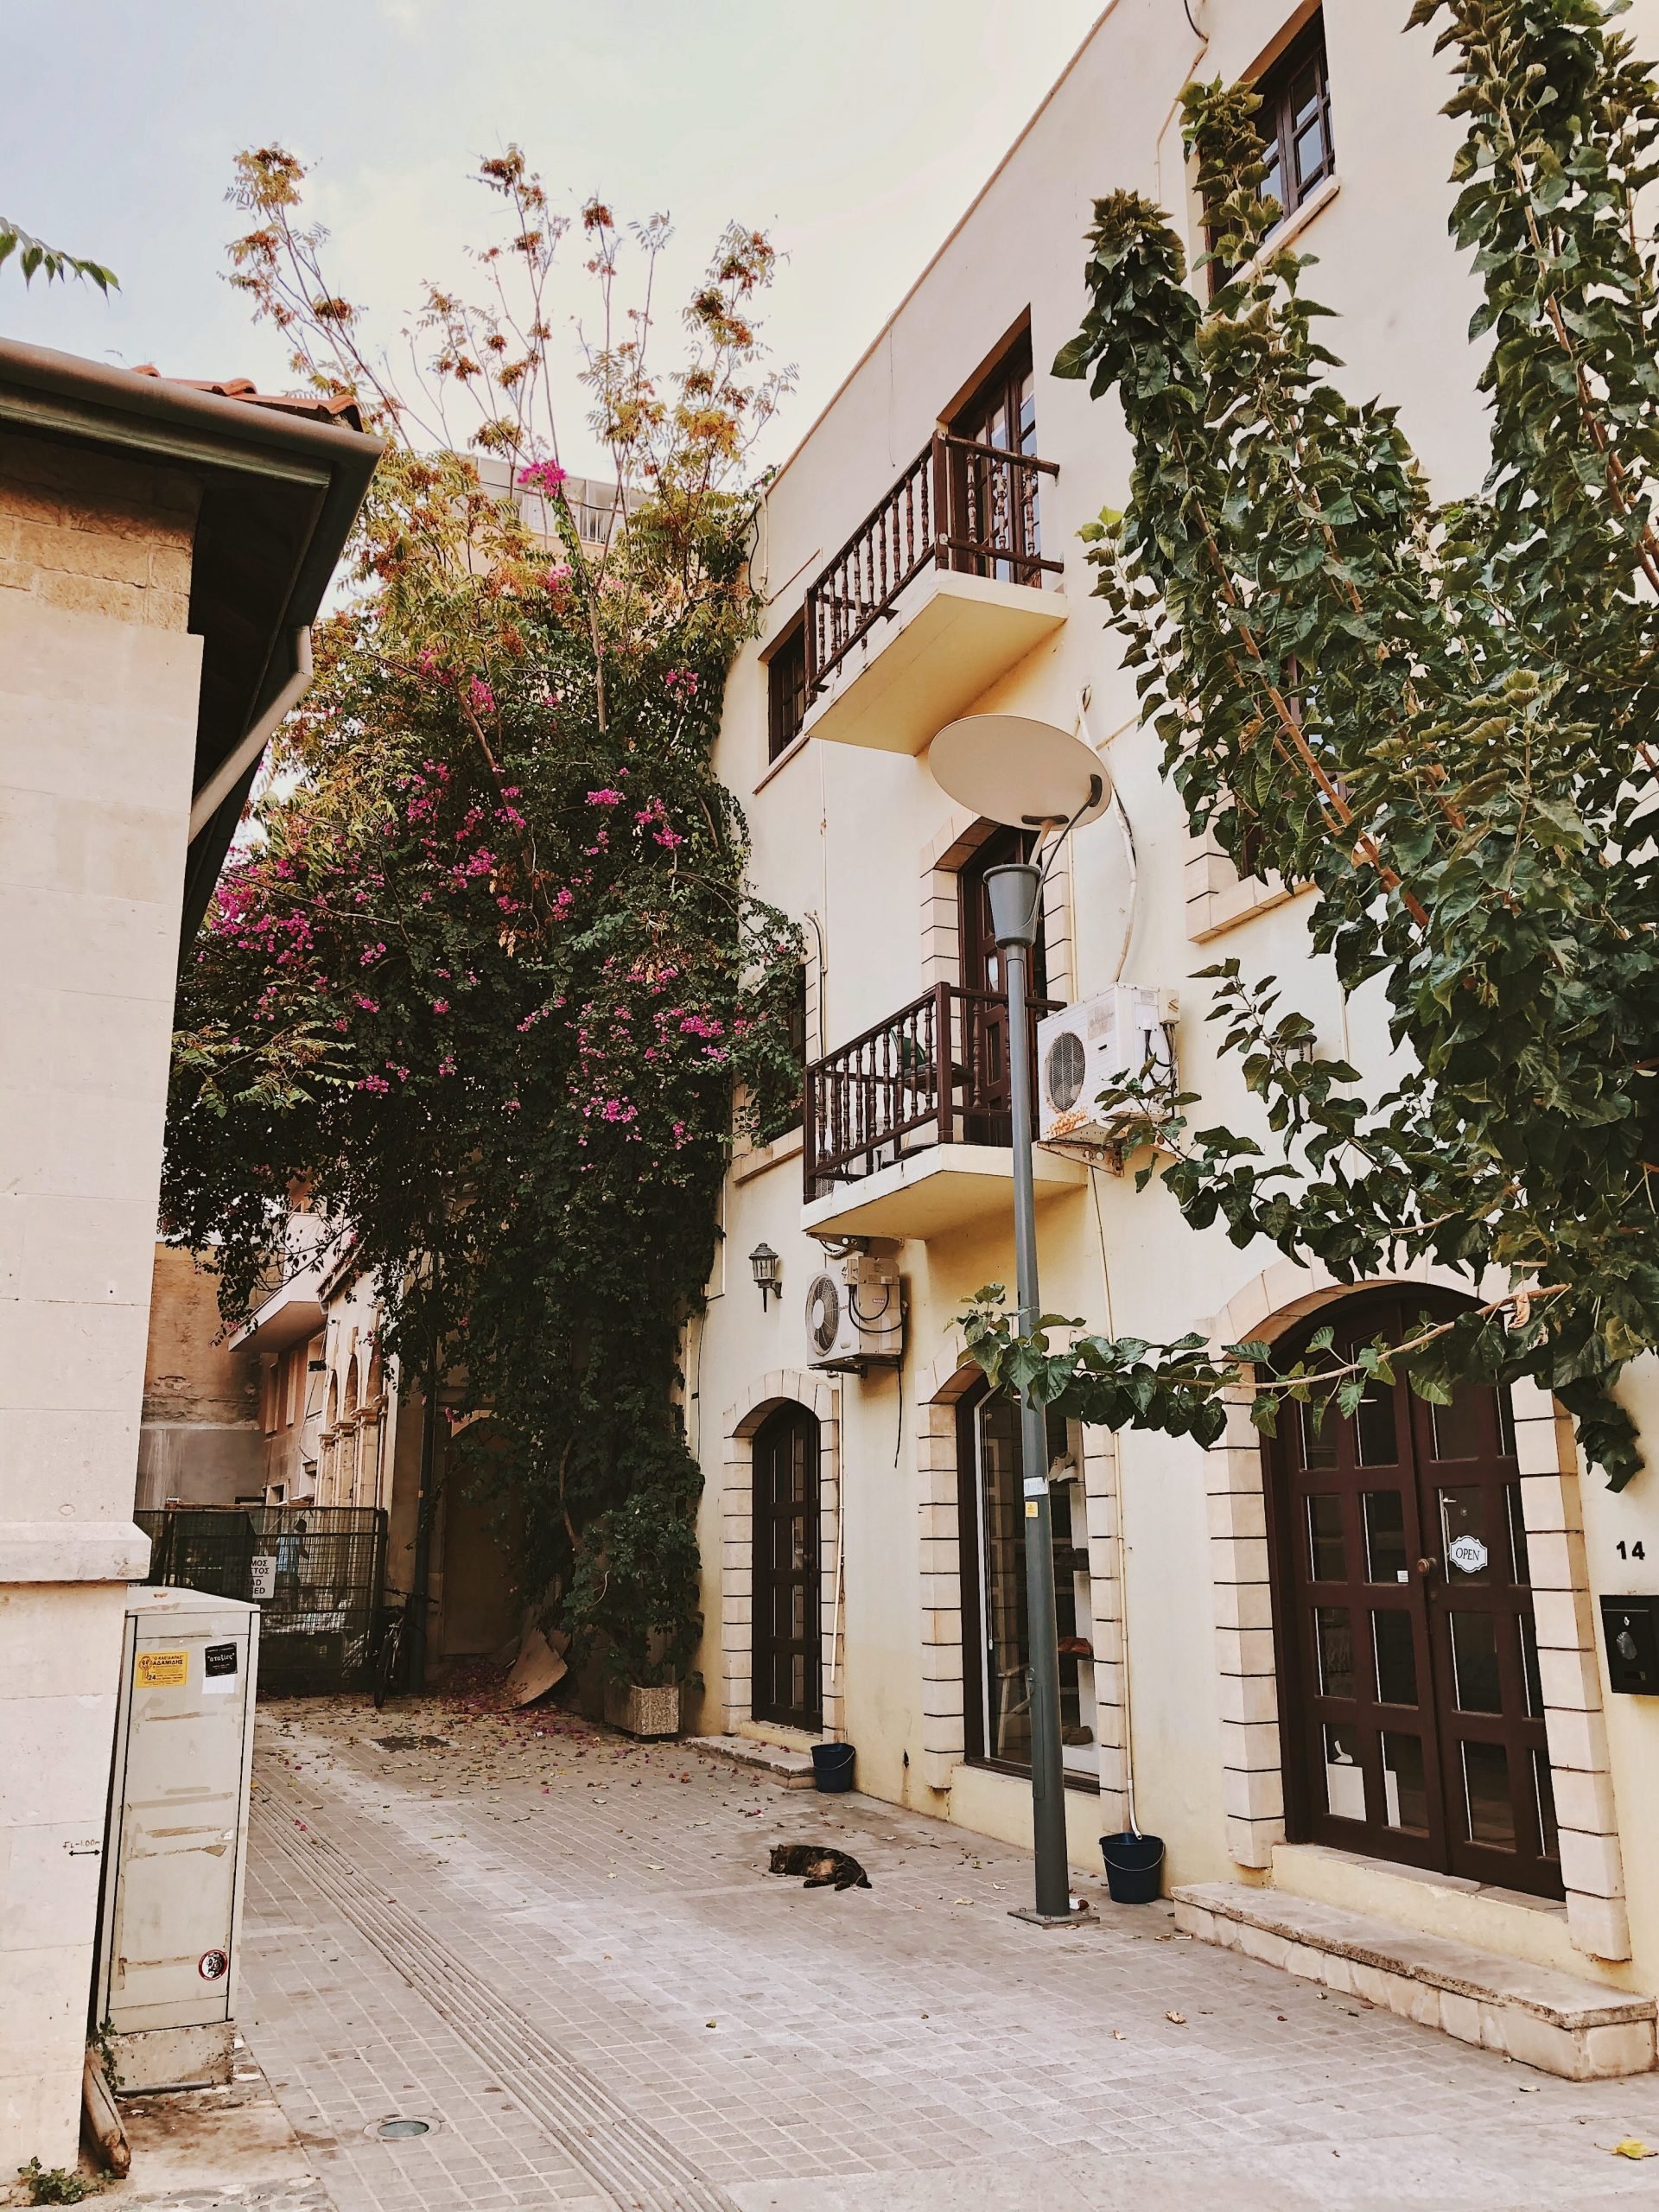 Limassol old town, Most Instagrammable Places In Cyprus And Best Cyprus Instagram Spots